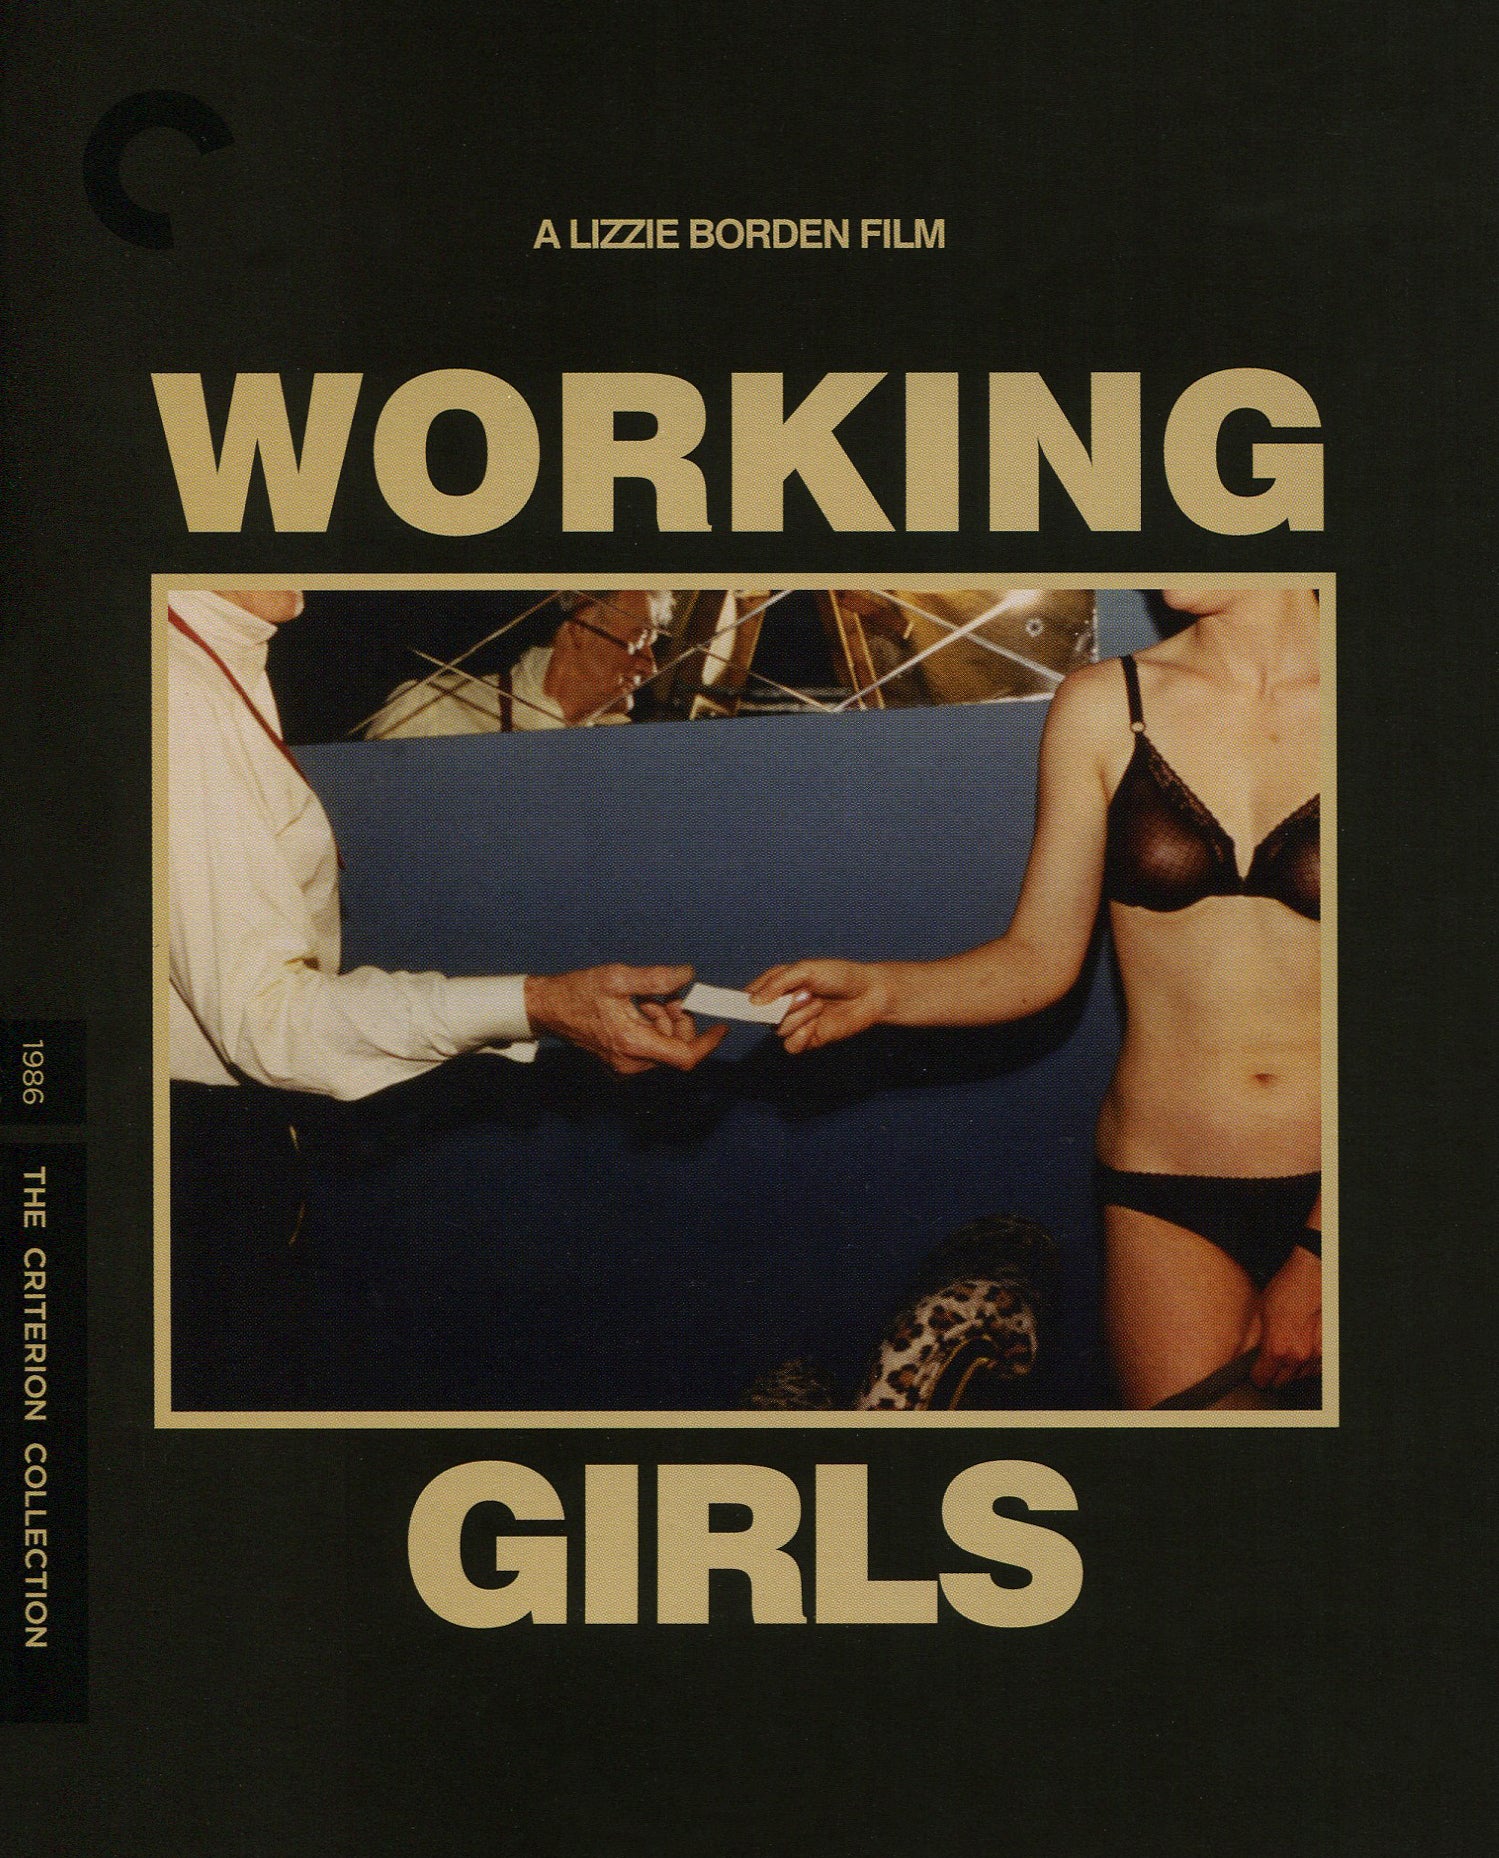 Working Girls [Criterion Collection] [Blu-ray] cover art